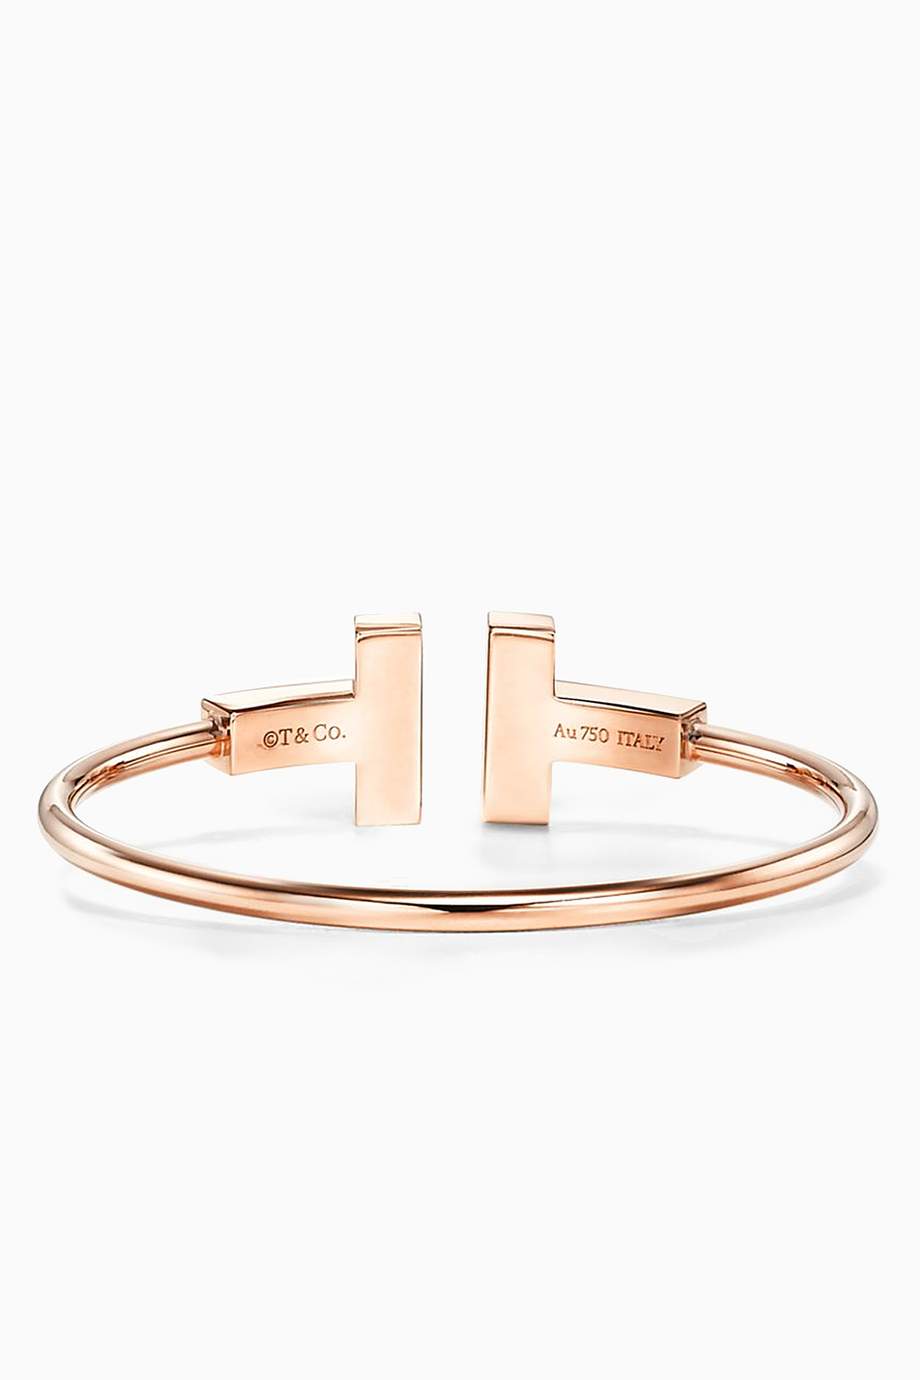 Shop Tiffany & Co. Rose Gold Tiffany T Wide Mother-of-Pearl Wire ...